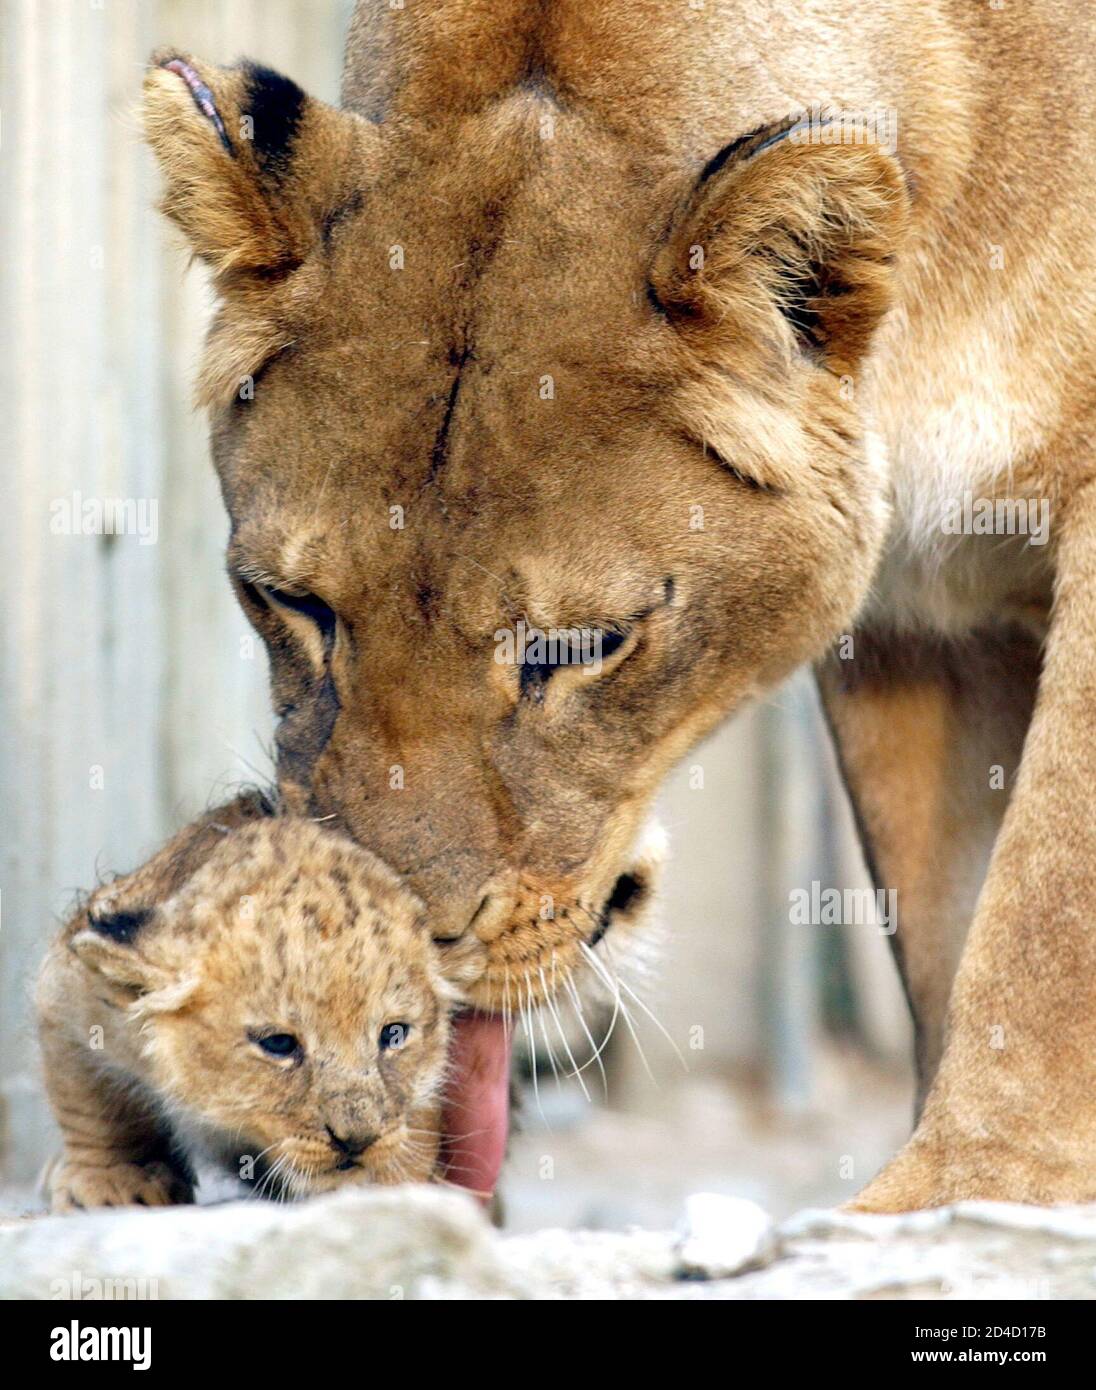 Lioness Stella licks one of her four-week-old cubs at the zoo al Maglio in Magliaso, Switzerland, March 6, 2003. The litter of three born on February 6 made their first public appearance at the zoo in southern Switzerland on Thursday. REUTERS/Remy Steinegger  RST/HM/ Stock Photo